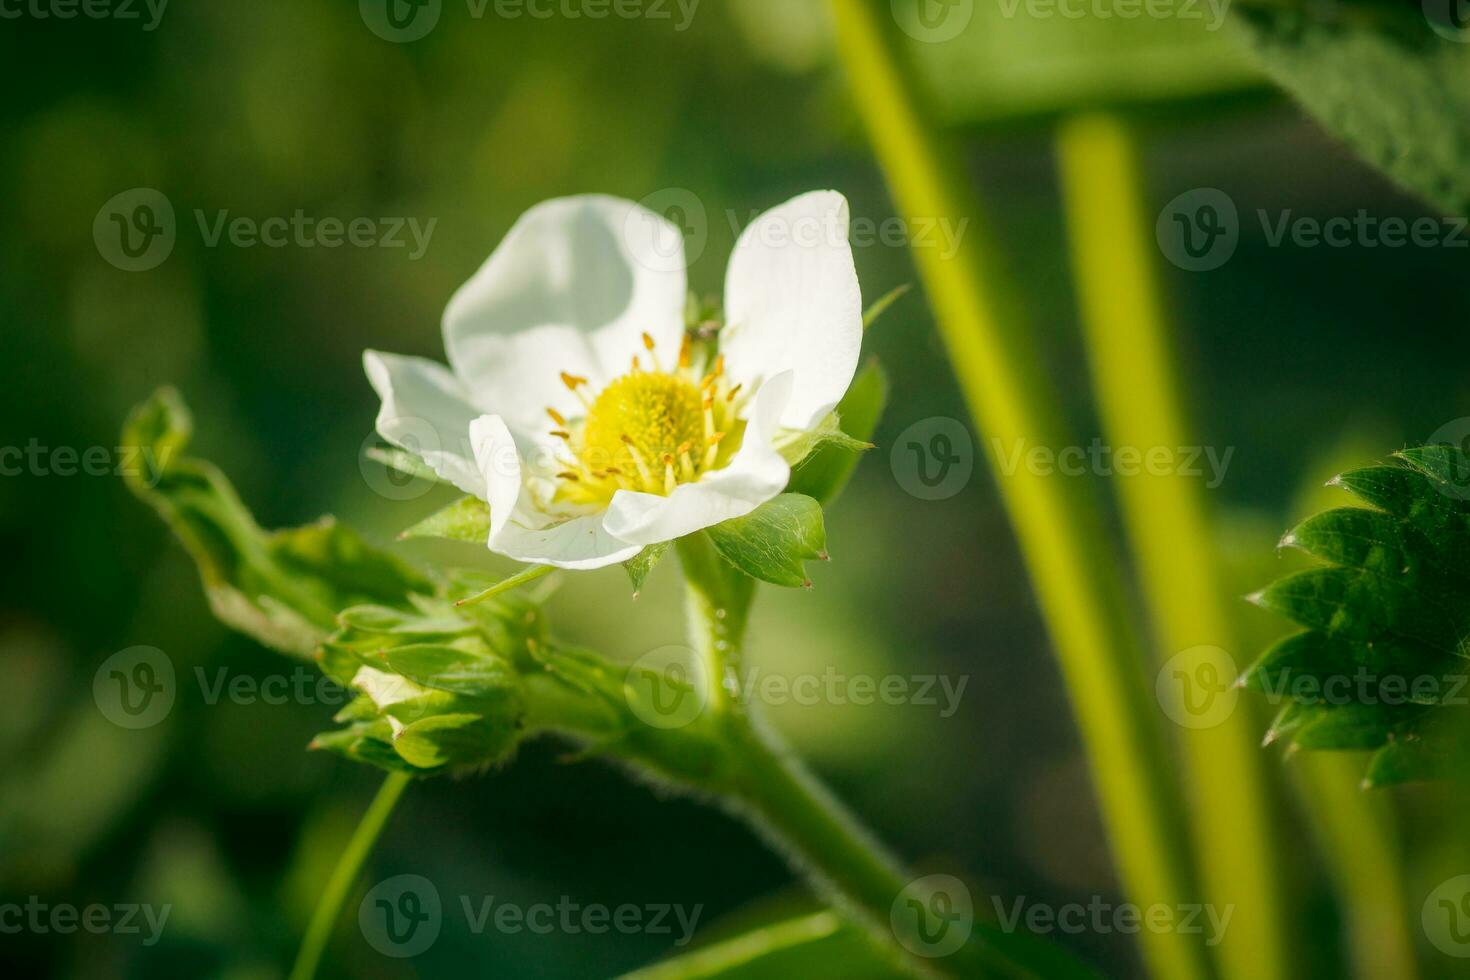 Strawberry flowers. Blooming strawberries. Beautiful white strawberry flowers in green grass. Meadow with strawberry flowers. Nature strawberry flower in spring. Strawberries flowers in meadow. photo